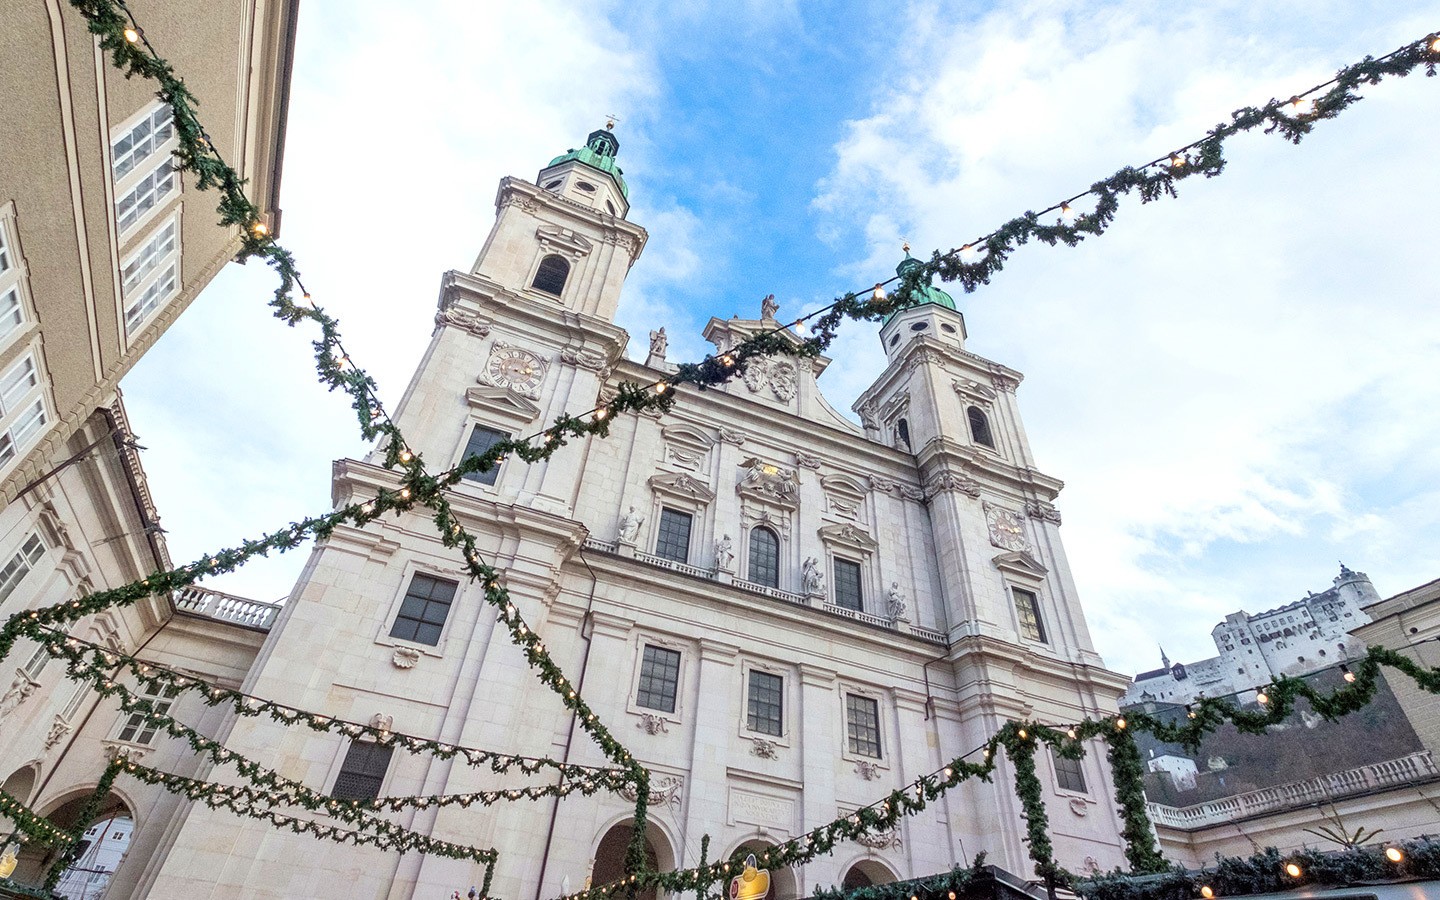 Mozart and markets: The best things to do in Salzburg in winter